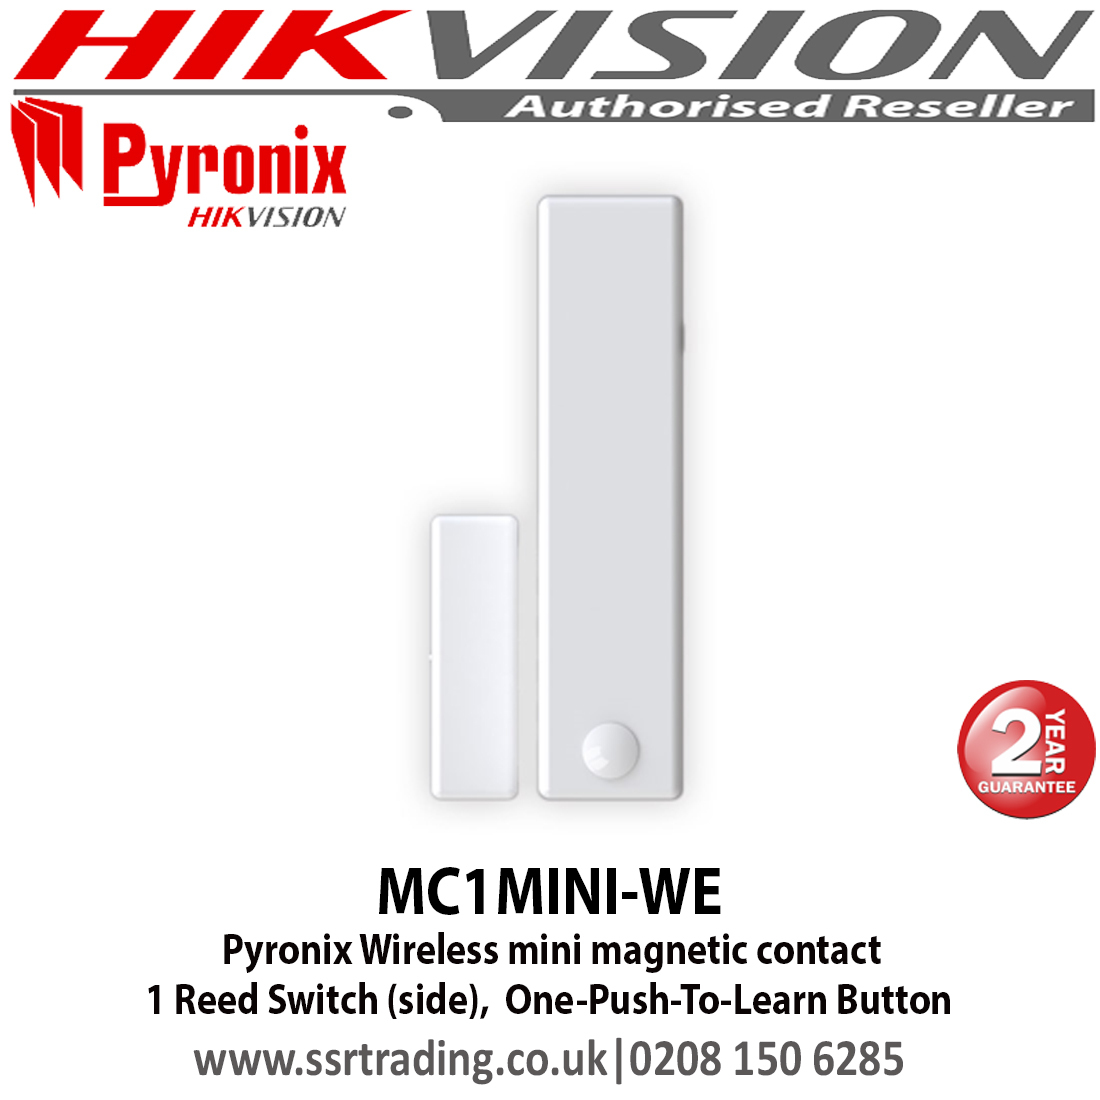 hikvision ivms 4200 download pc